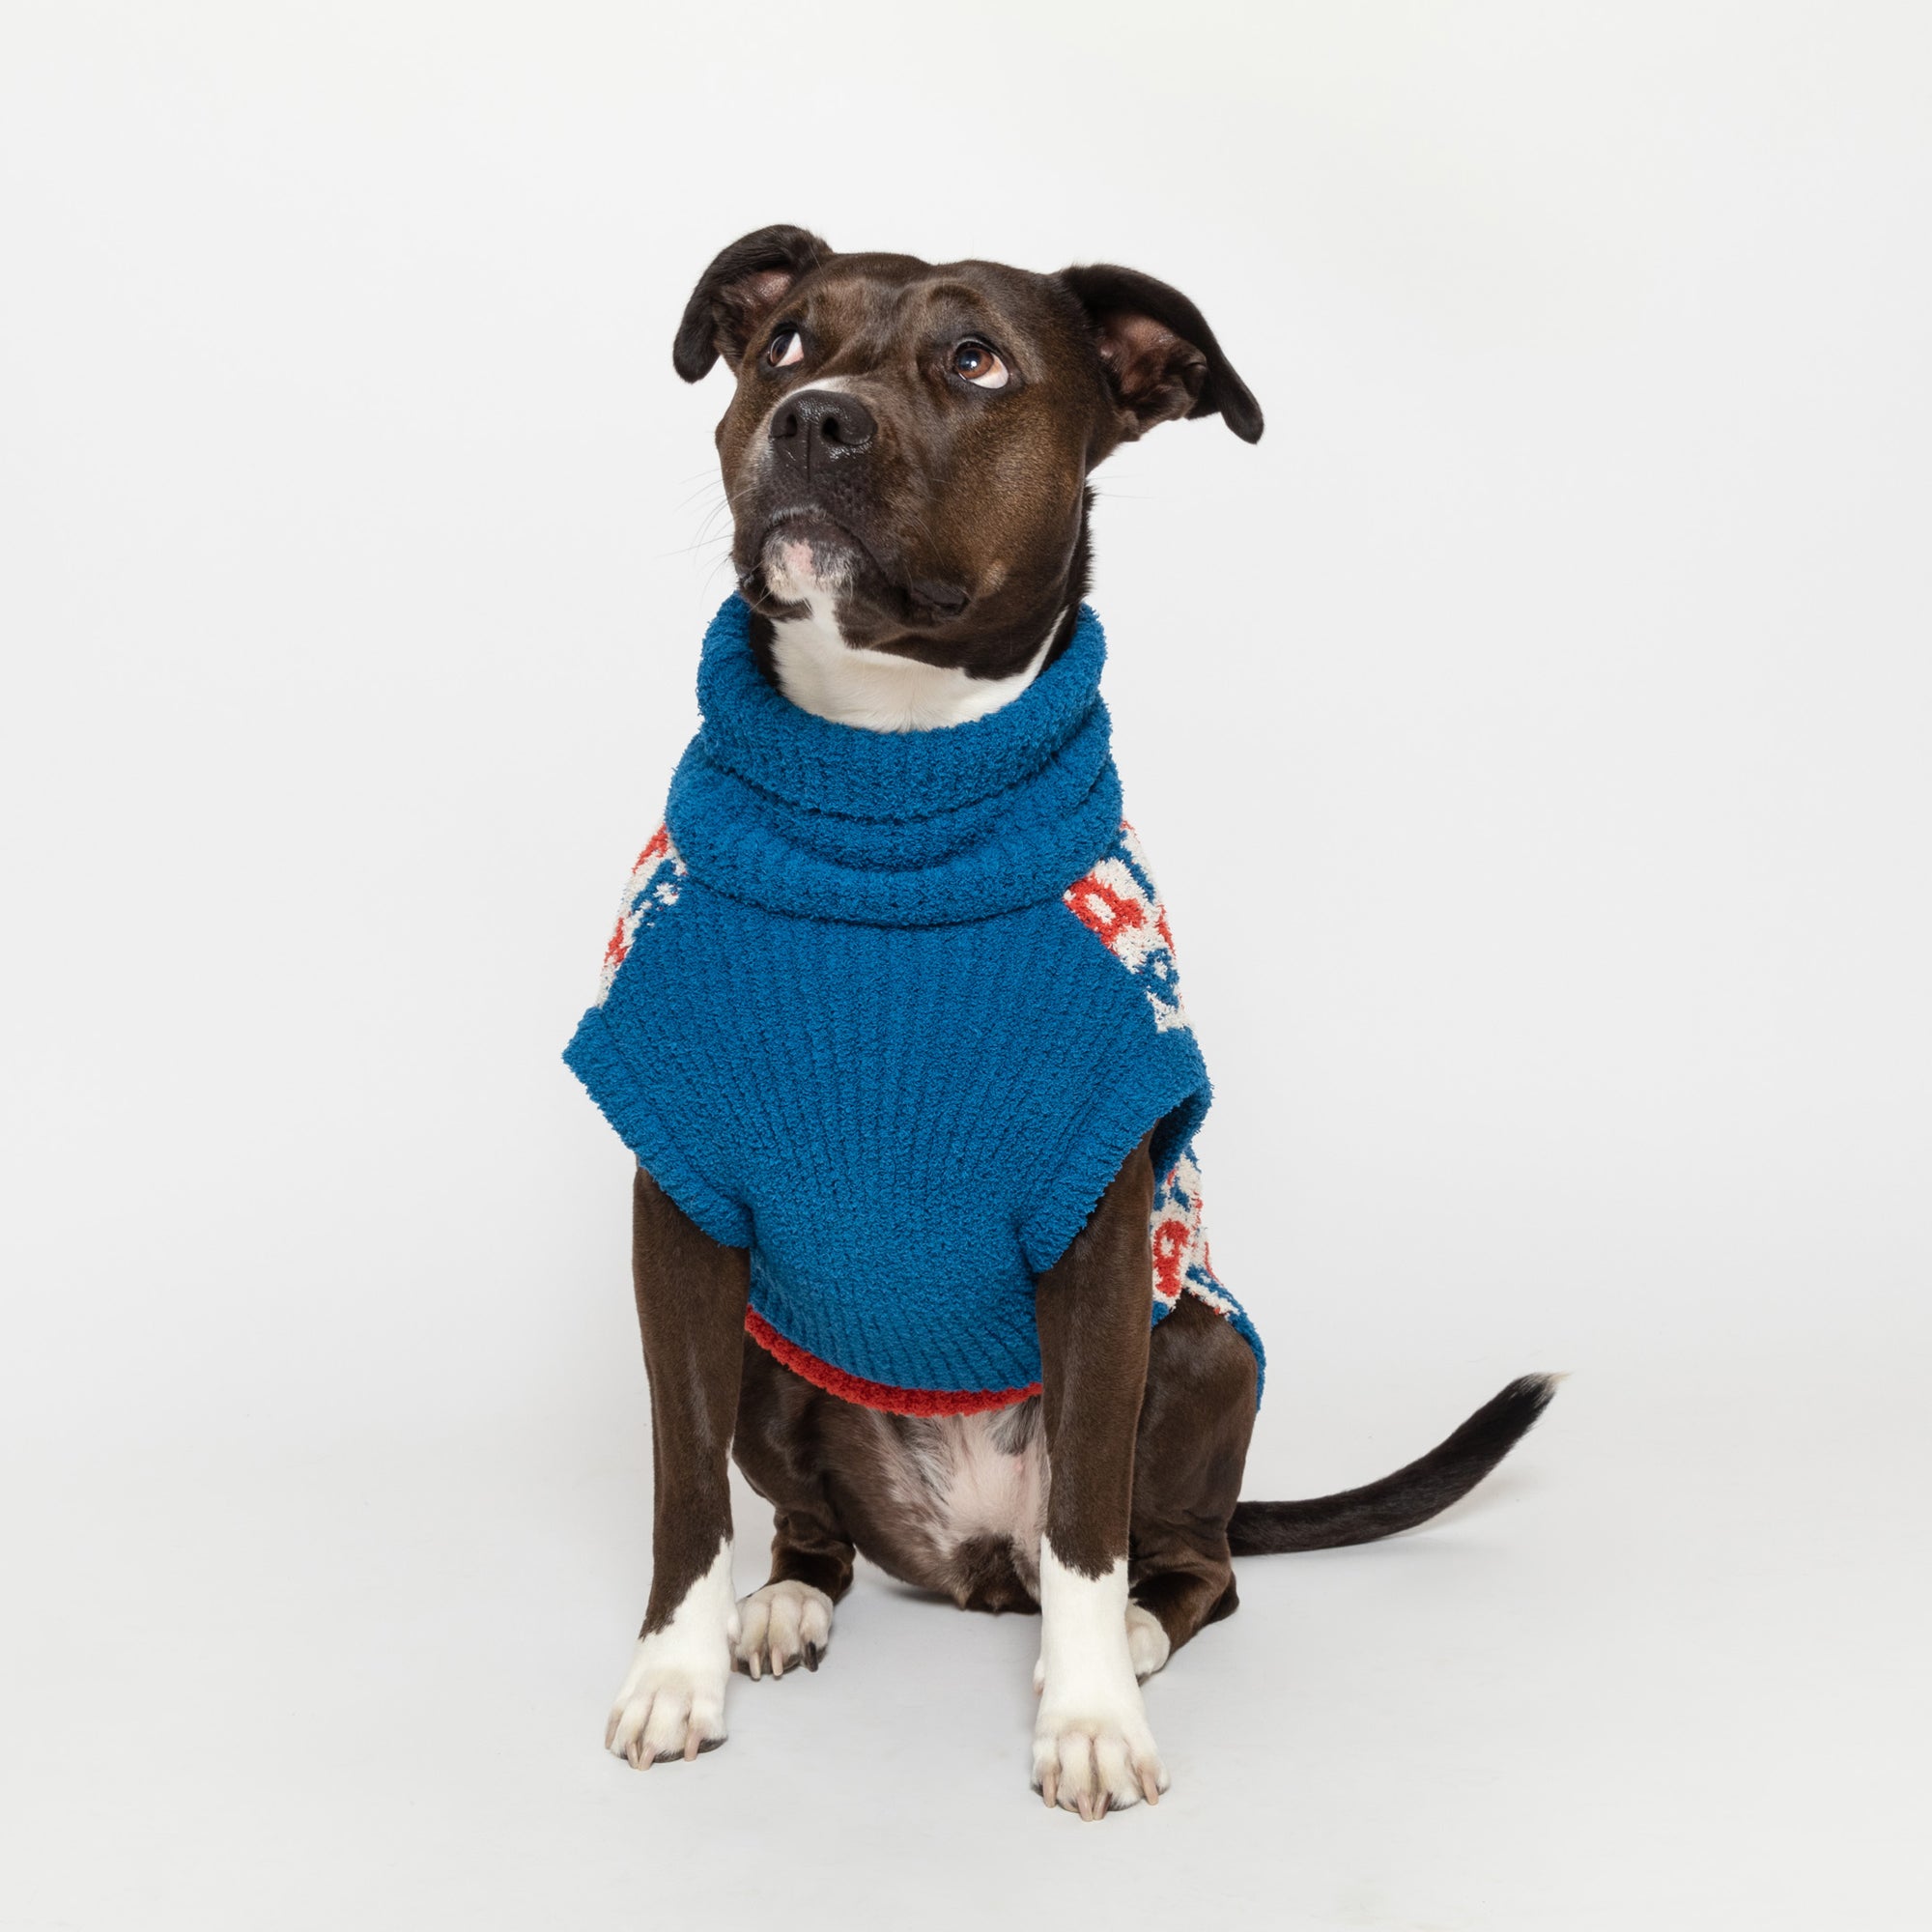 A poised black and white dog with an attentive gaze is seated against a white background, sporting a snug, blue turtleneck sweater with a playful "Treat" motif in white and red.